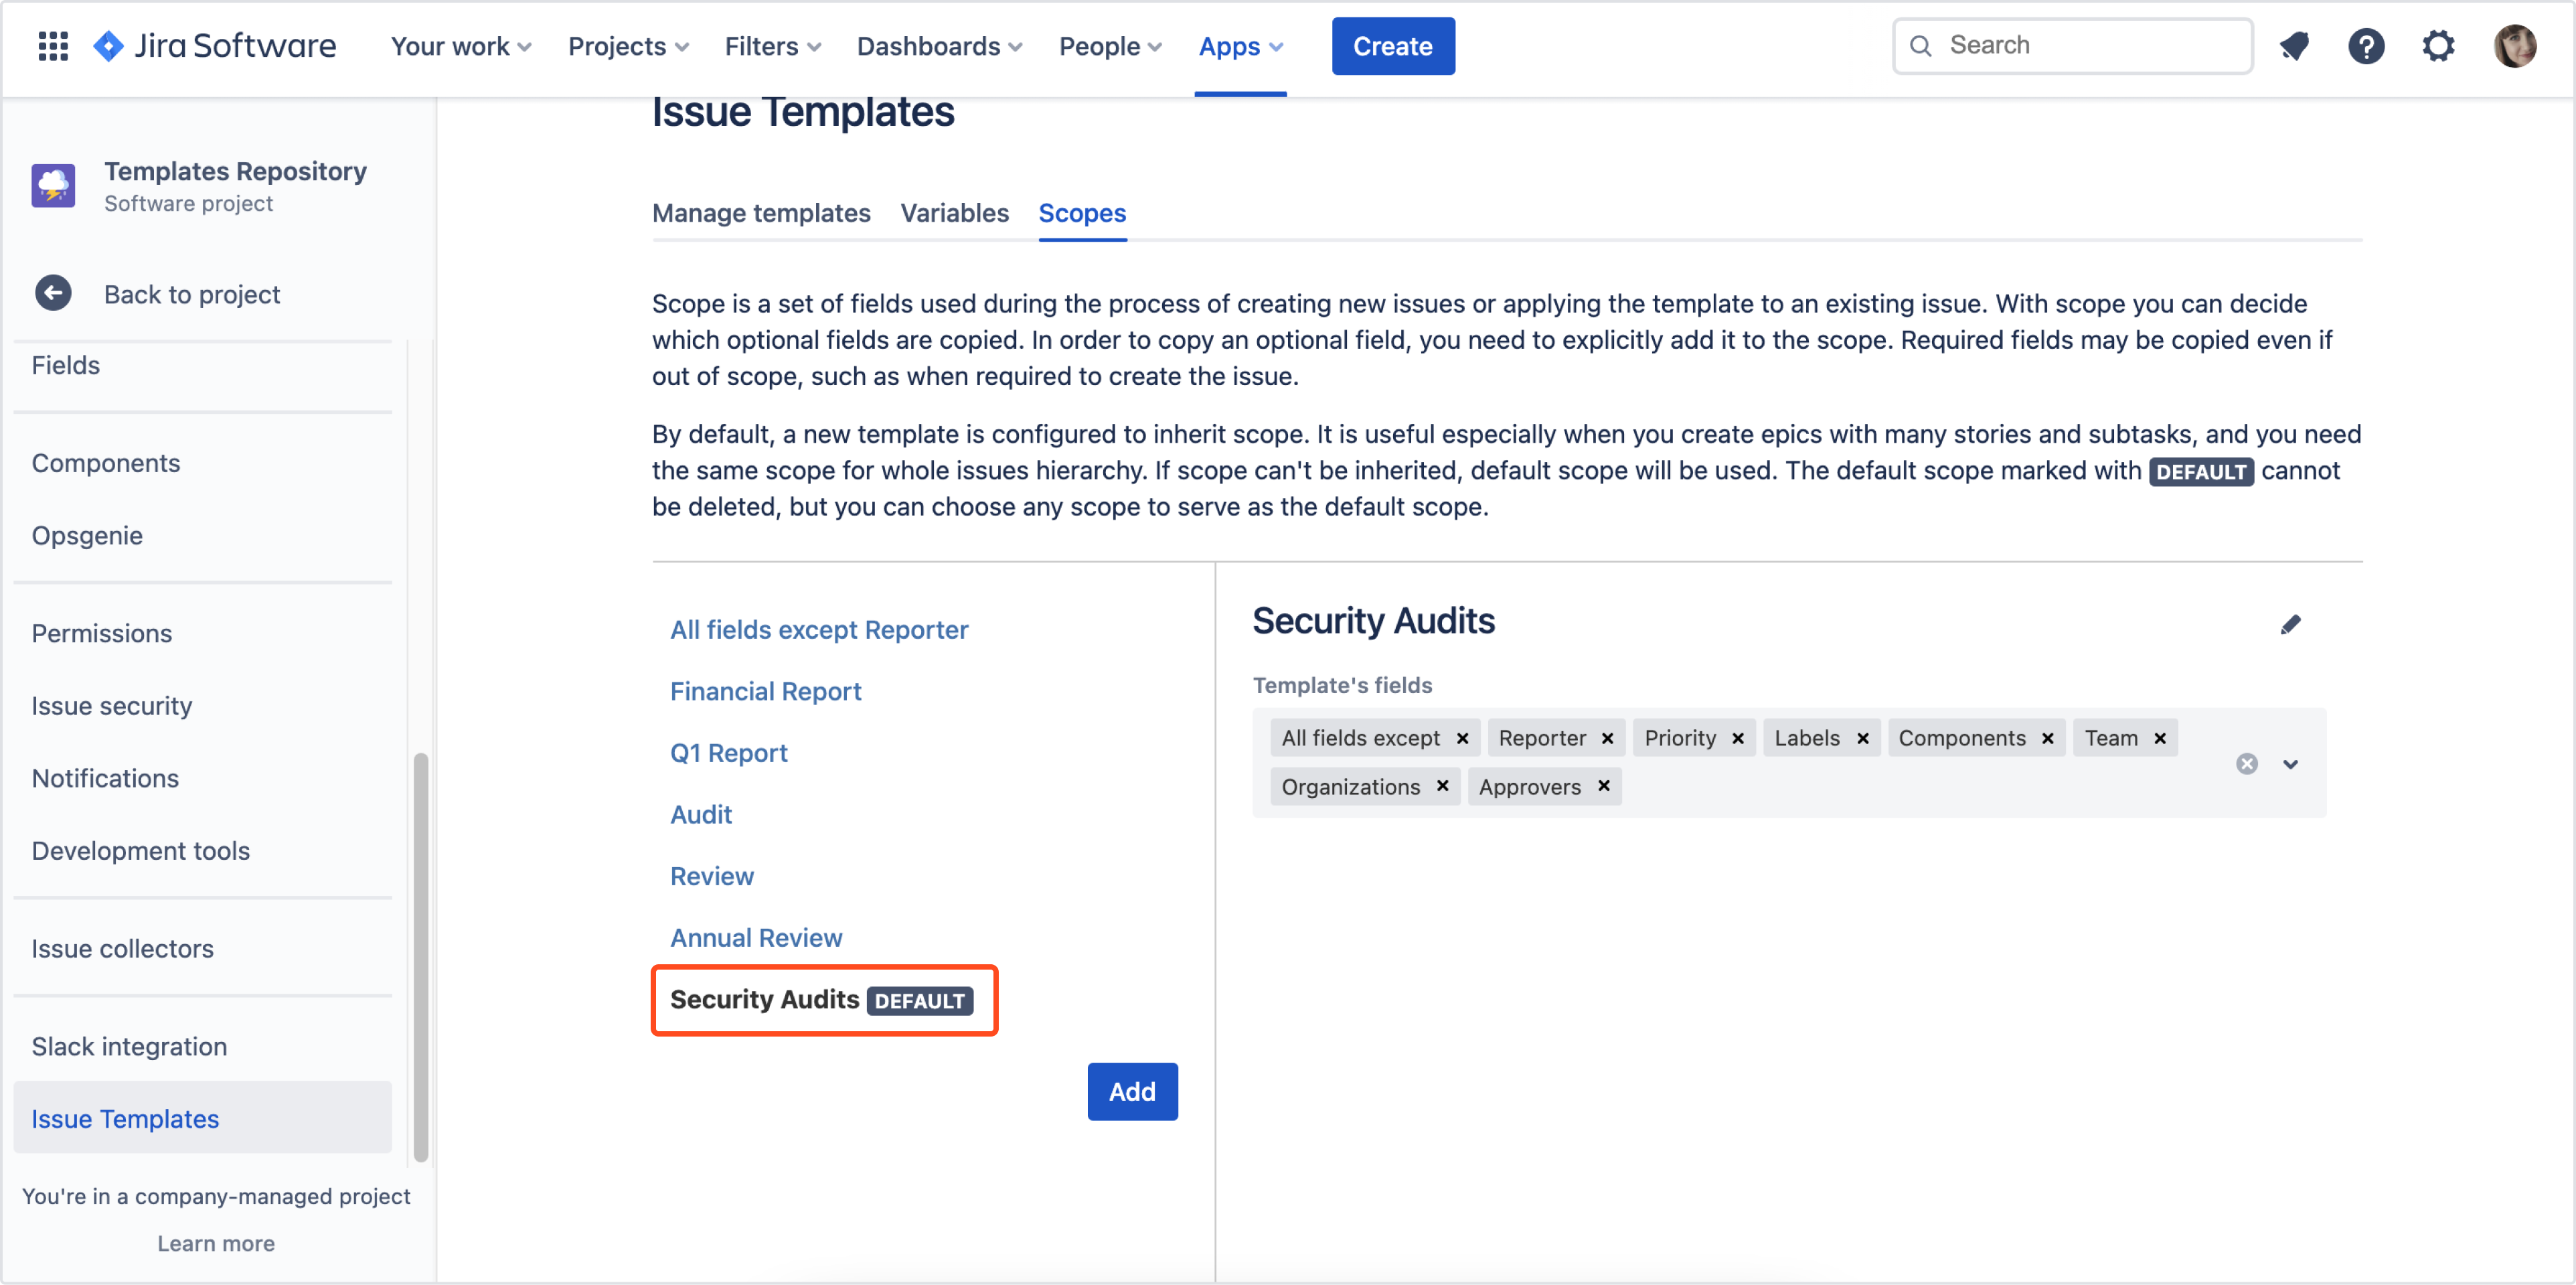 Issue Templates for Jira Cloud: Set of fields - Scope